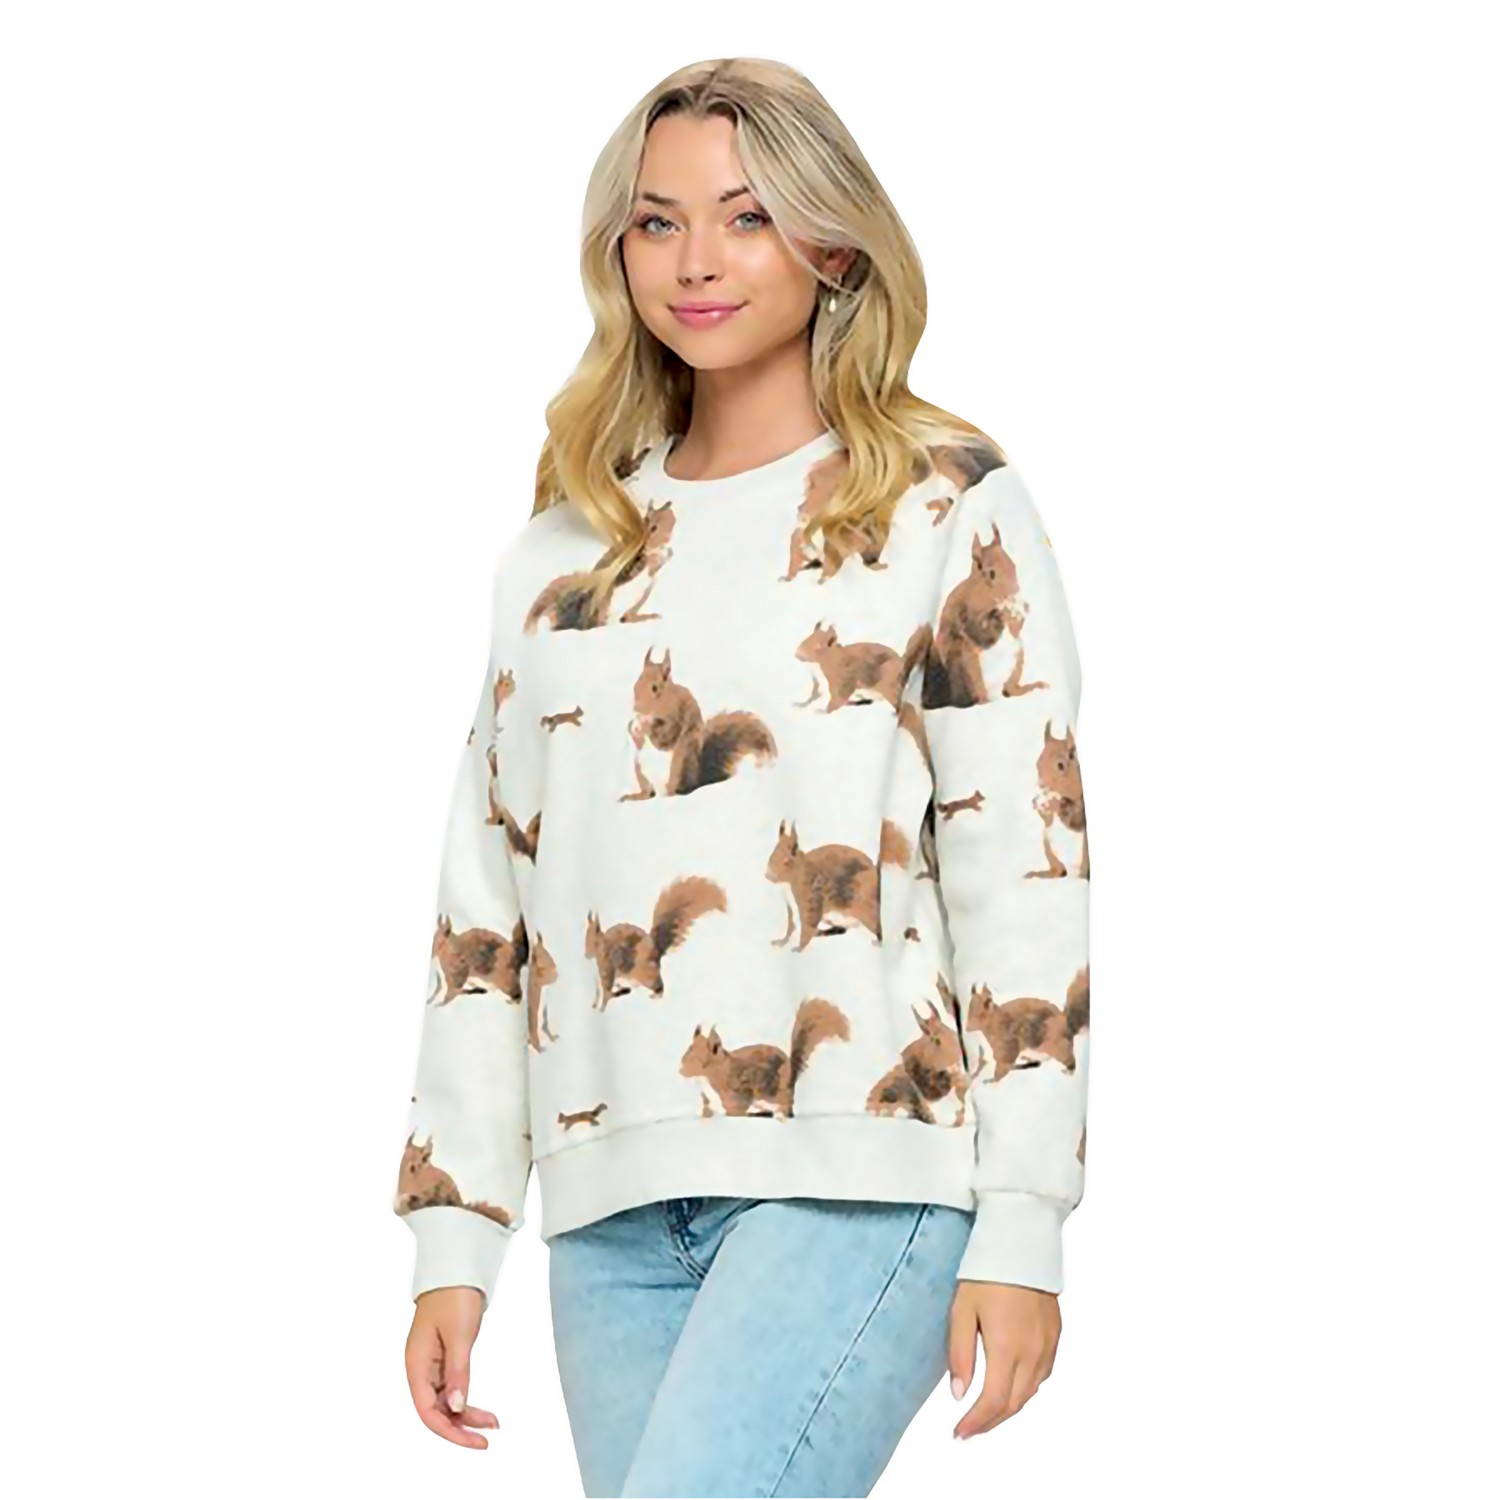 All-Over Squirrel Sweatshirt | What on Earth